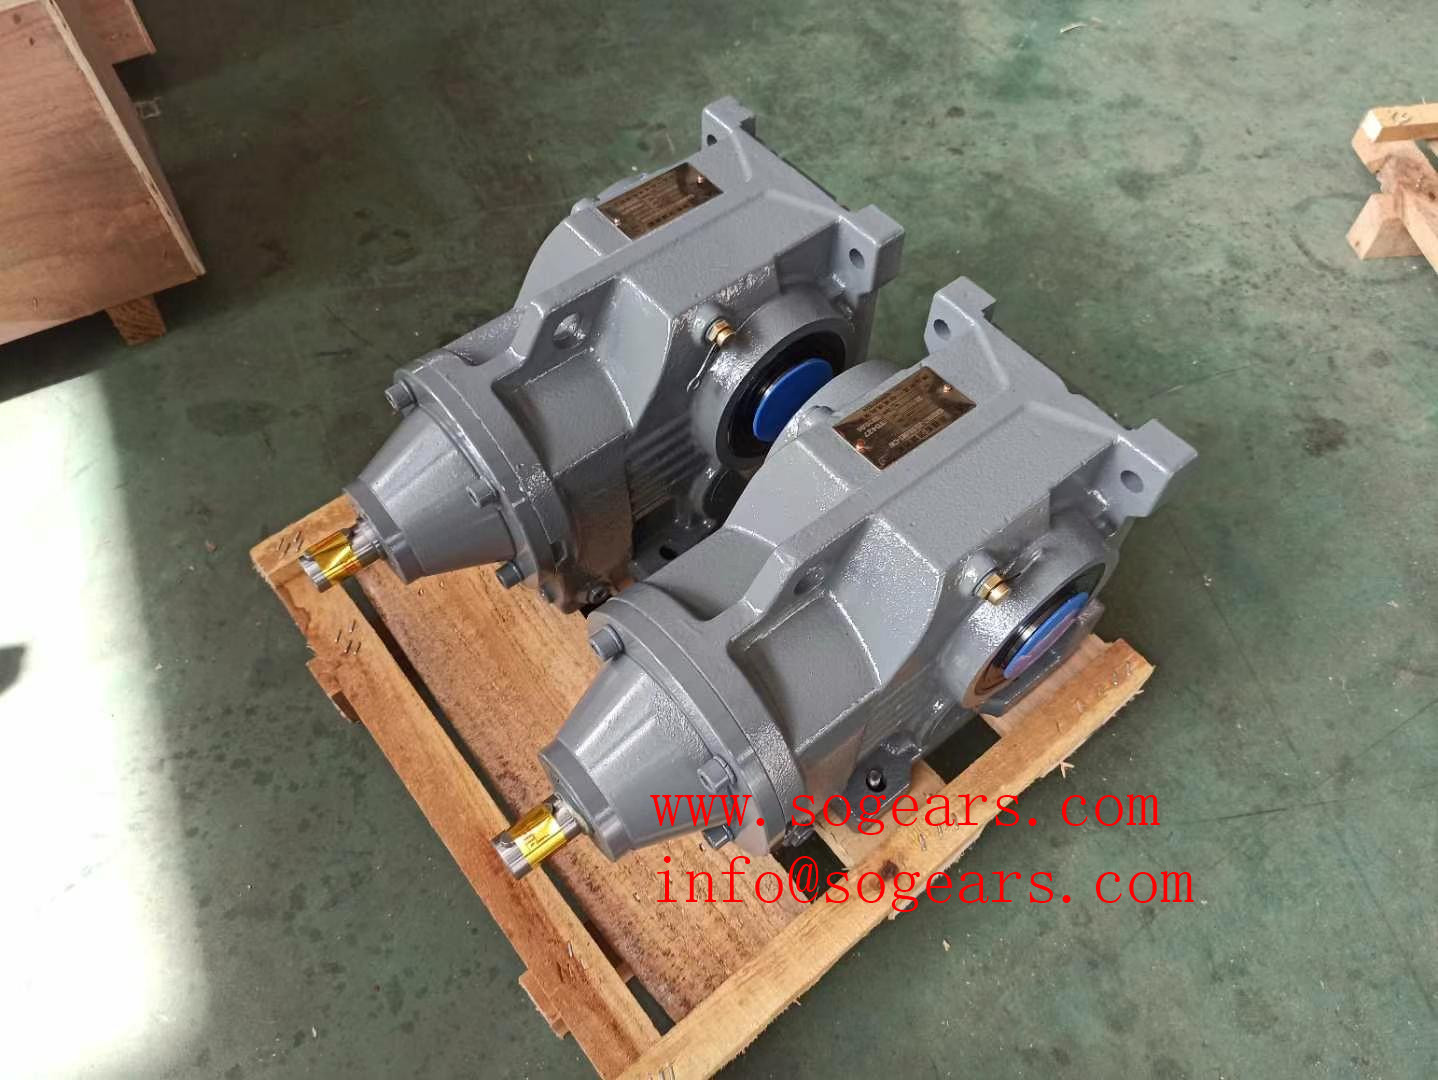 We can supply the equivalent gear motors